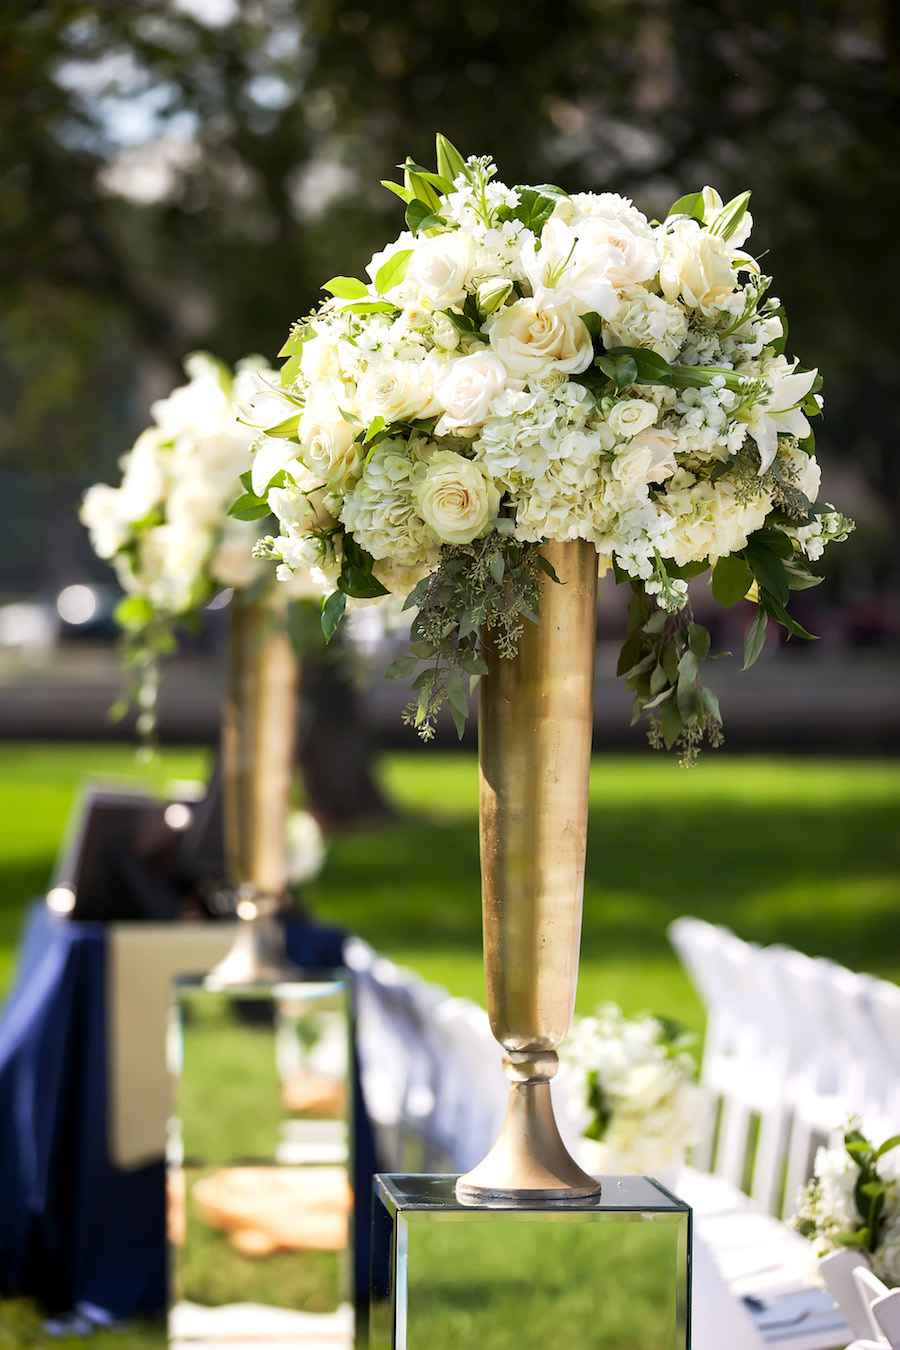 Tall White, Green and Gold Elegant Wedding Ceremony Flowers Decor on Mirrored Pedestals